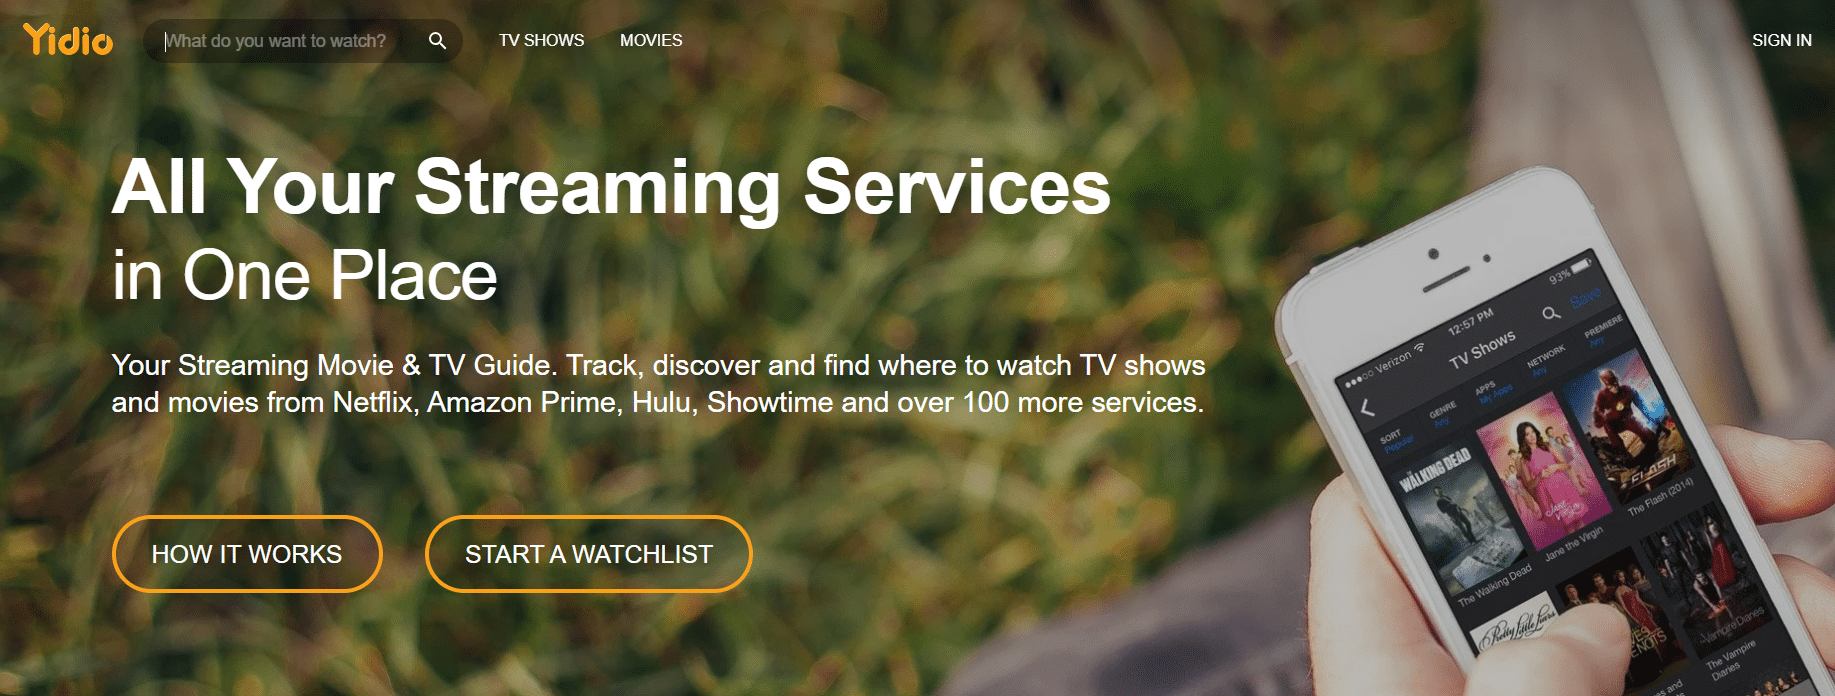 Discover search. Search & discover ￼. Services in one. Best apps to find where shows and movies are streaming.